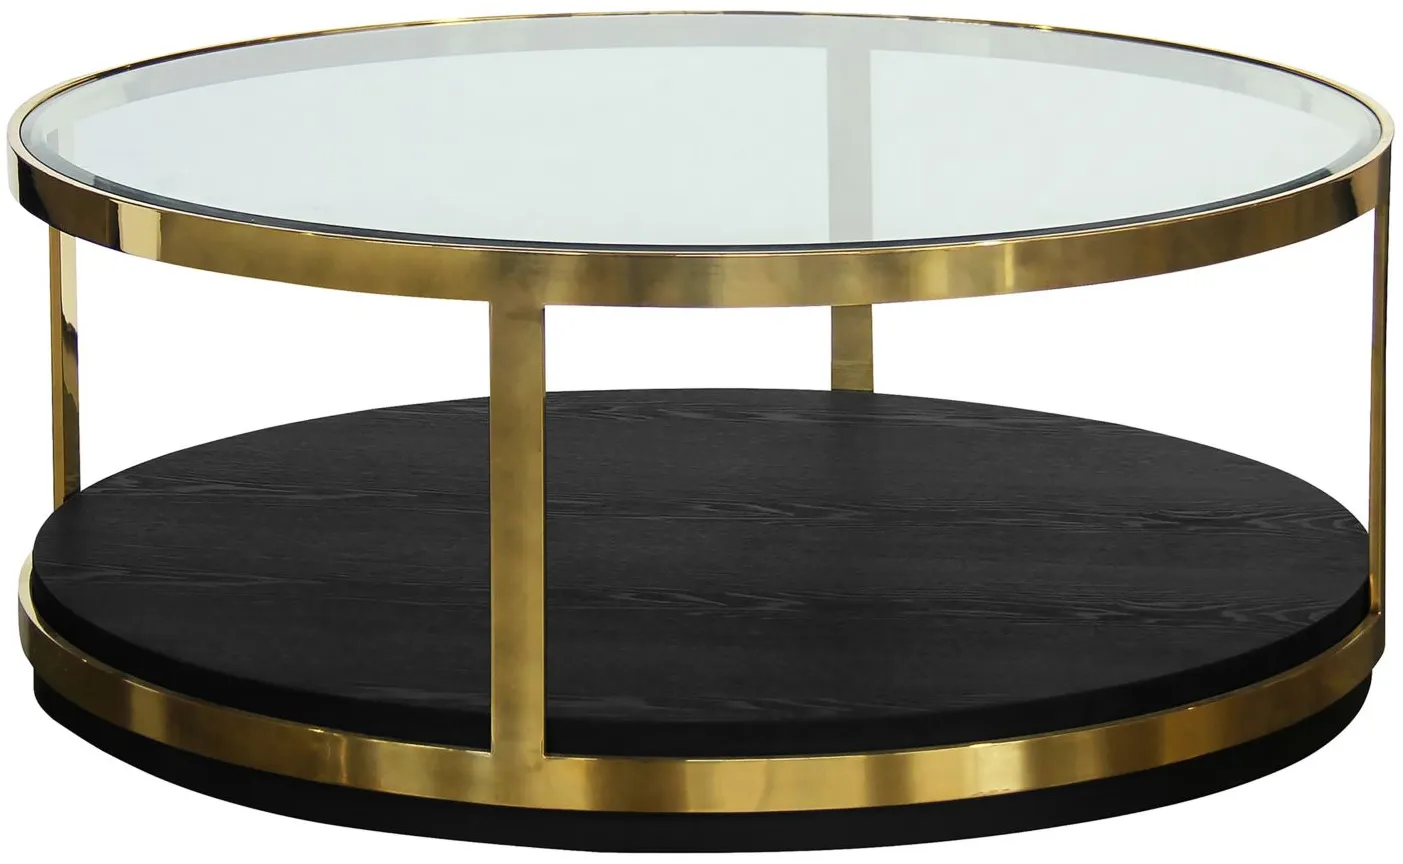 Stephen Round Coffee Table in Black by Armen Living